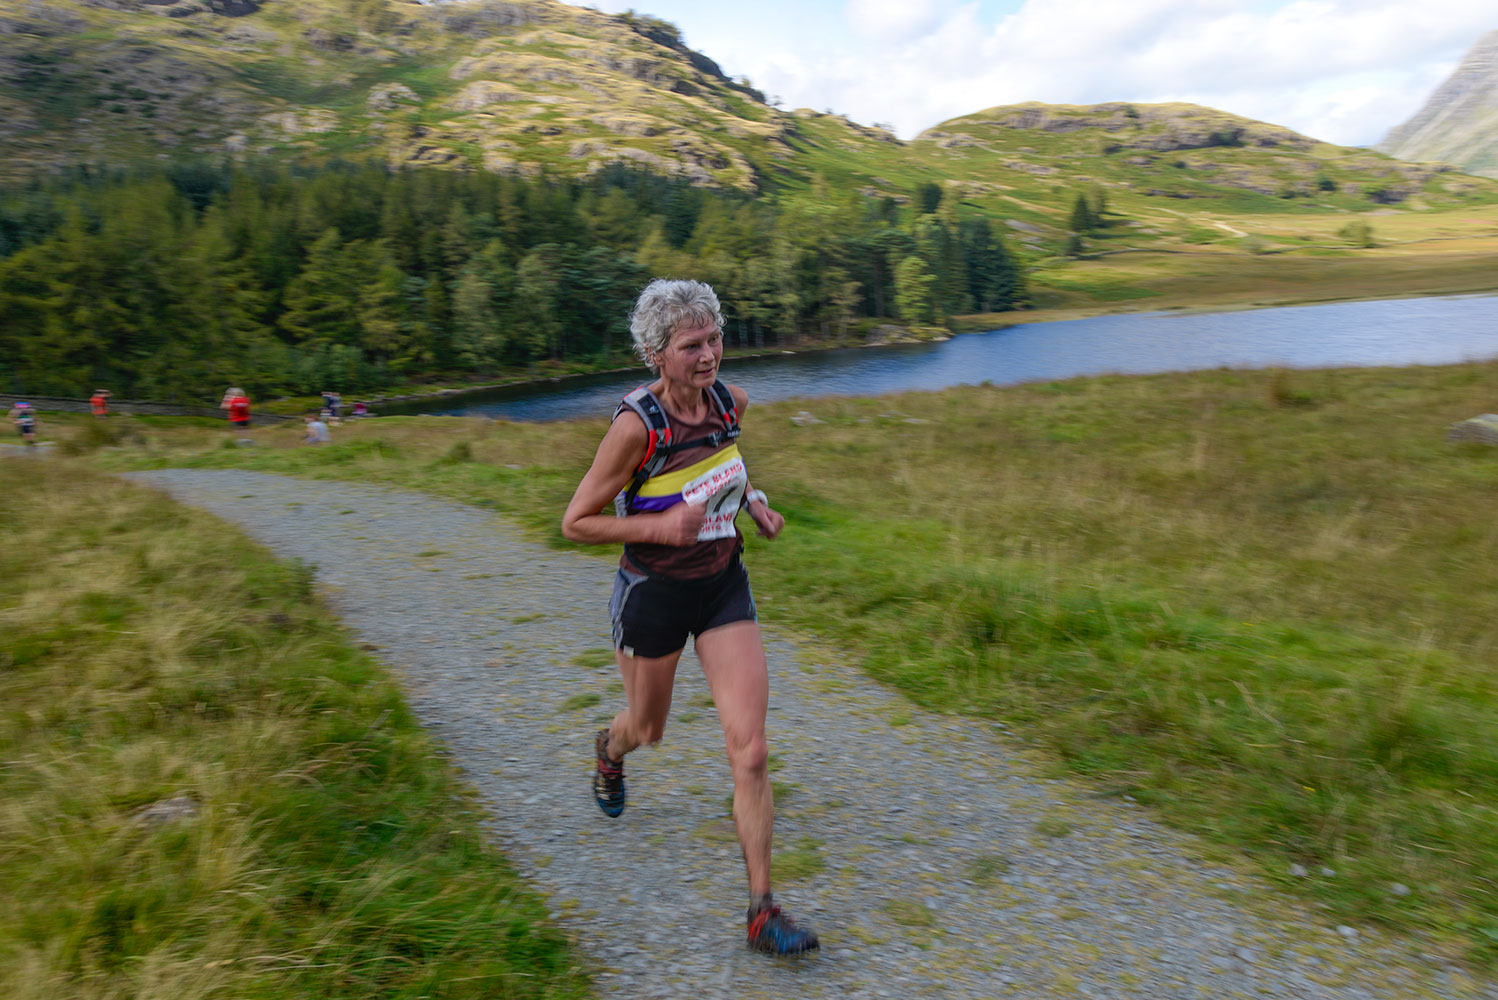 Competing in the Three Shires Fell Race in Cumbria in 2015. Nicky is a British long distance runner, specialising in fell running. She holds the women's records for each of the three major fell running challenges in the United Kingdom – the Bob Graham Round, the Ramsay Round and the Paddy Buckley Round, as well as being the only person to have run each of them in under twenty hours.